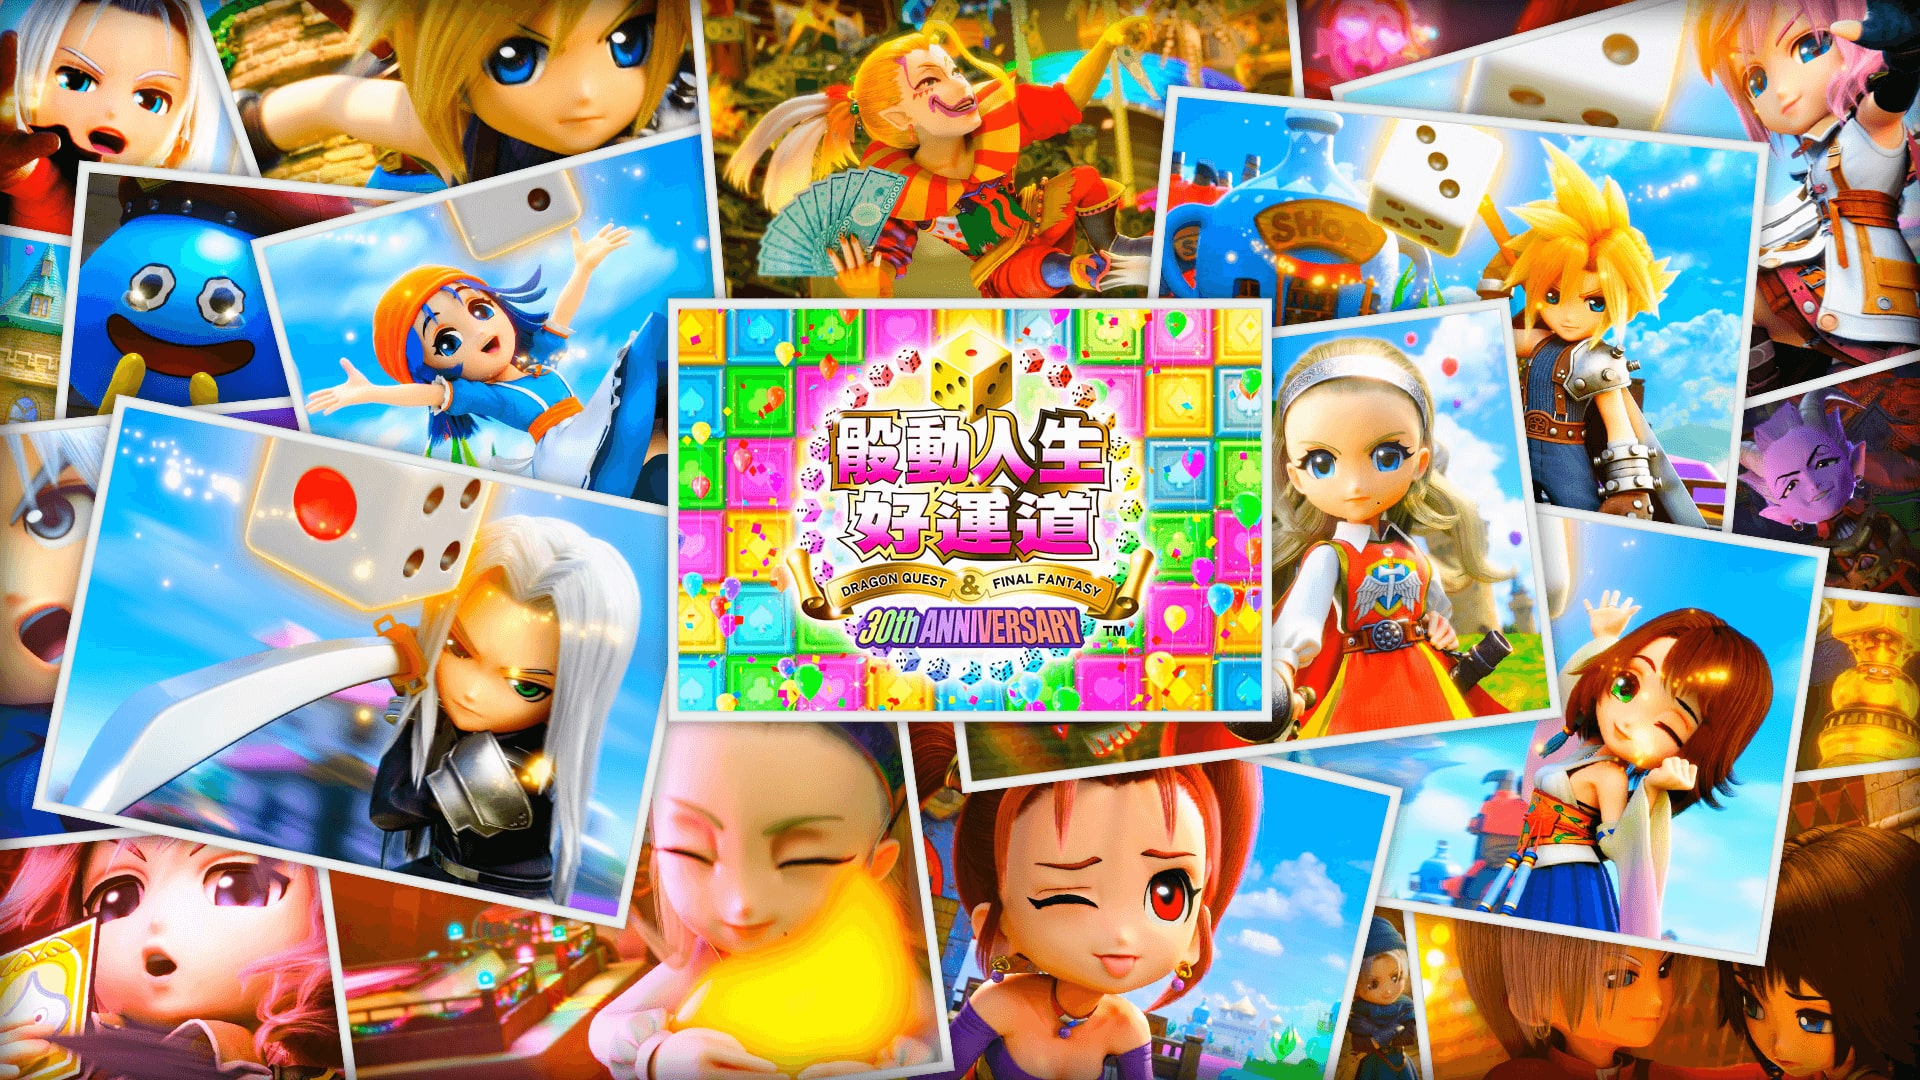 FORTUNE STREET DRAGON QUEST ＆ FINAL FANTASY 30th ANNIVERSARY (Chinese Ver.)